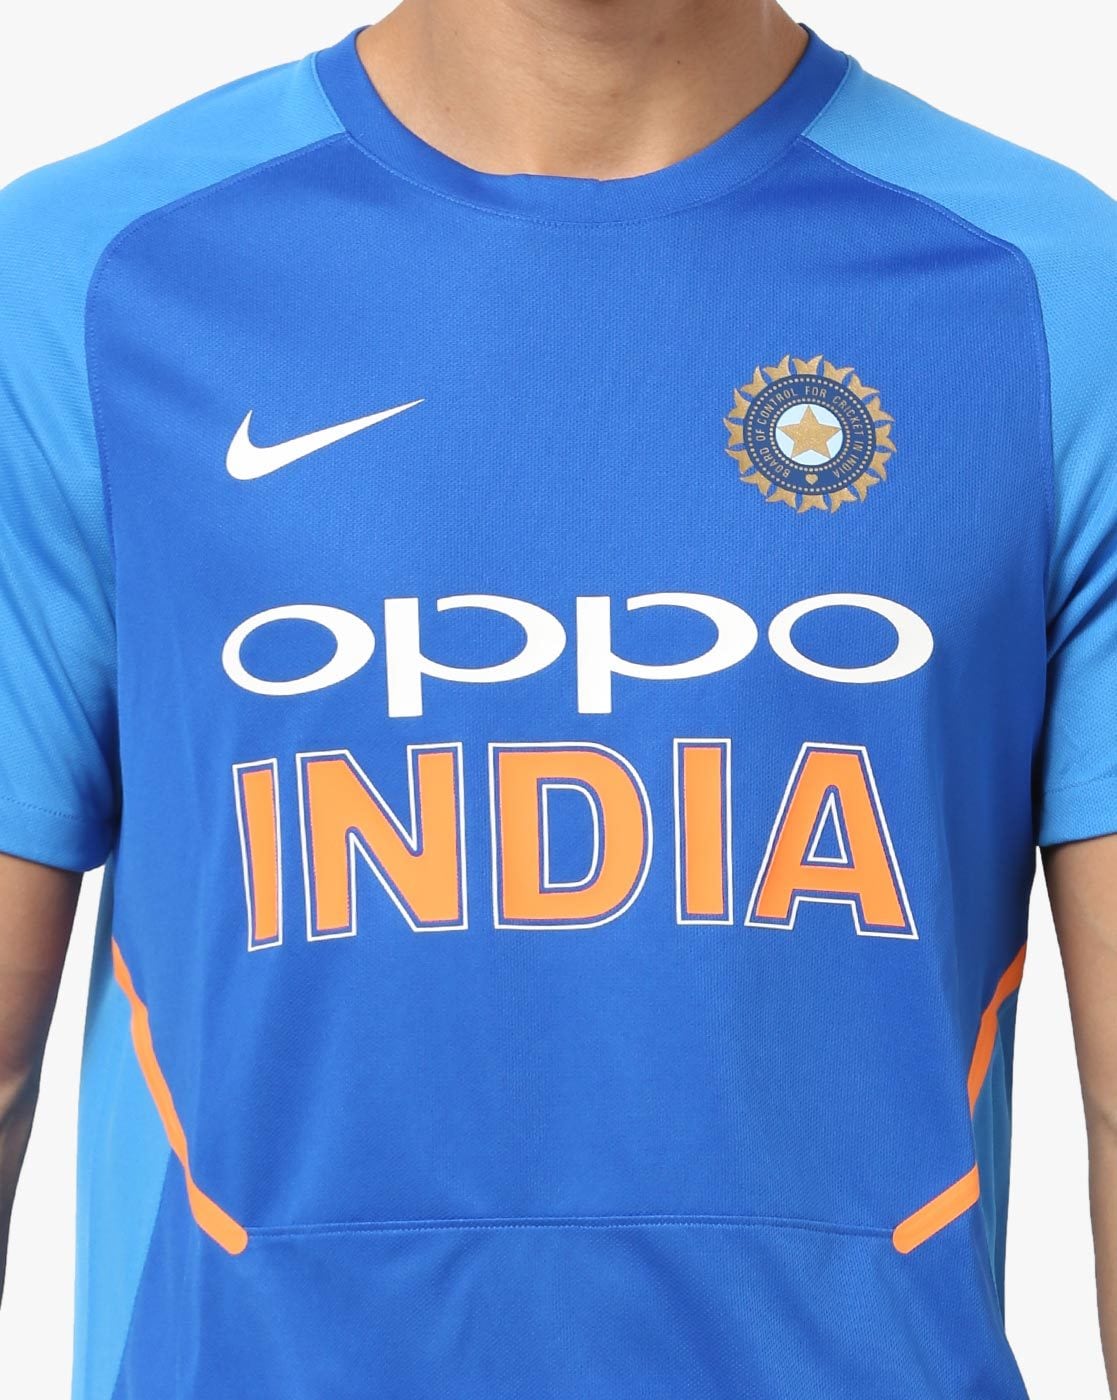 where can i buy indian cricket t shirts